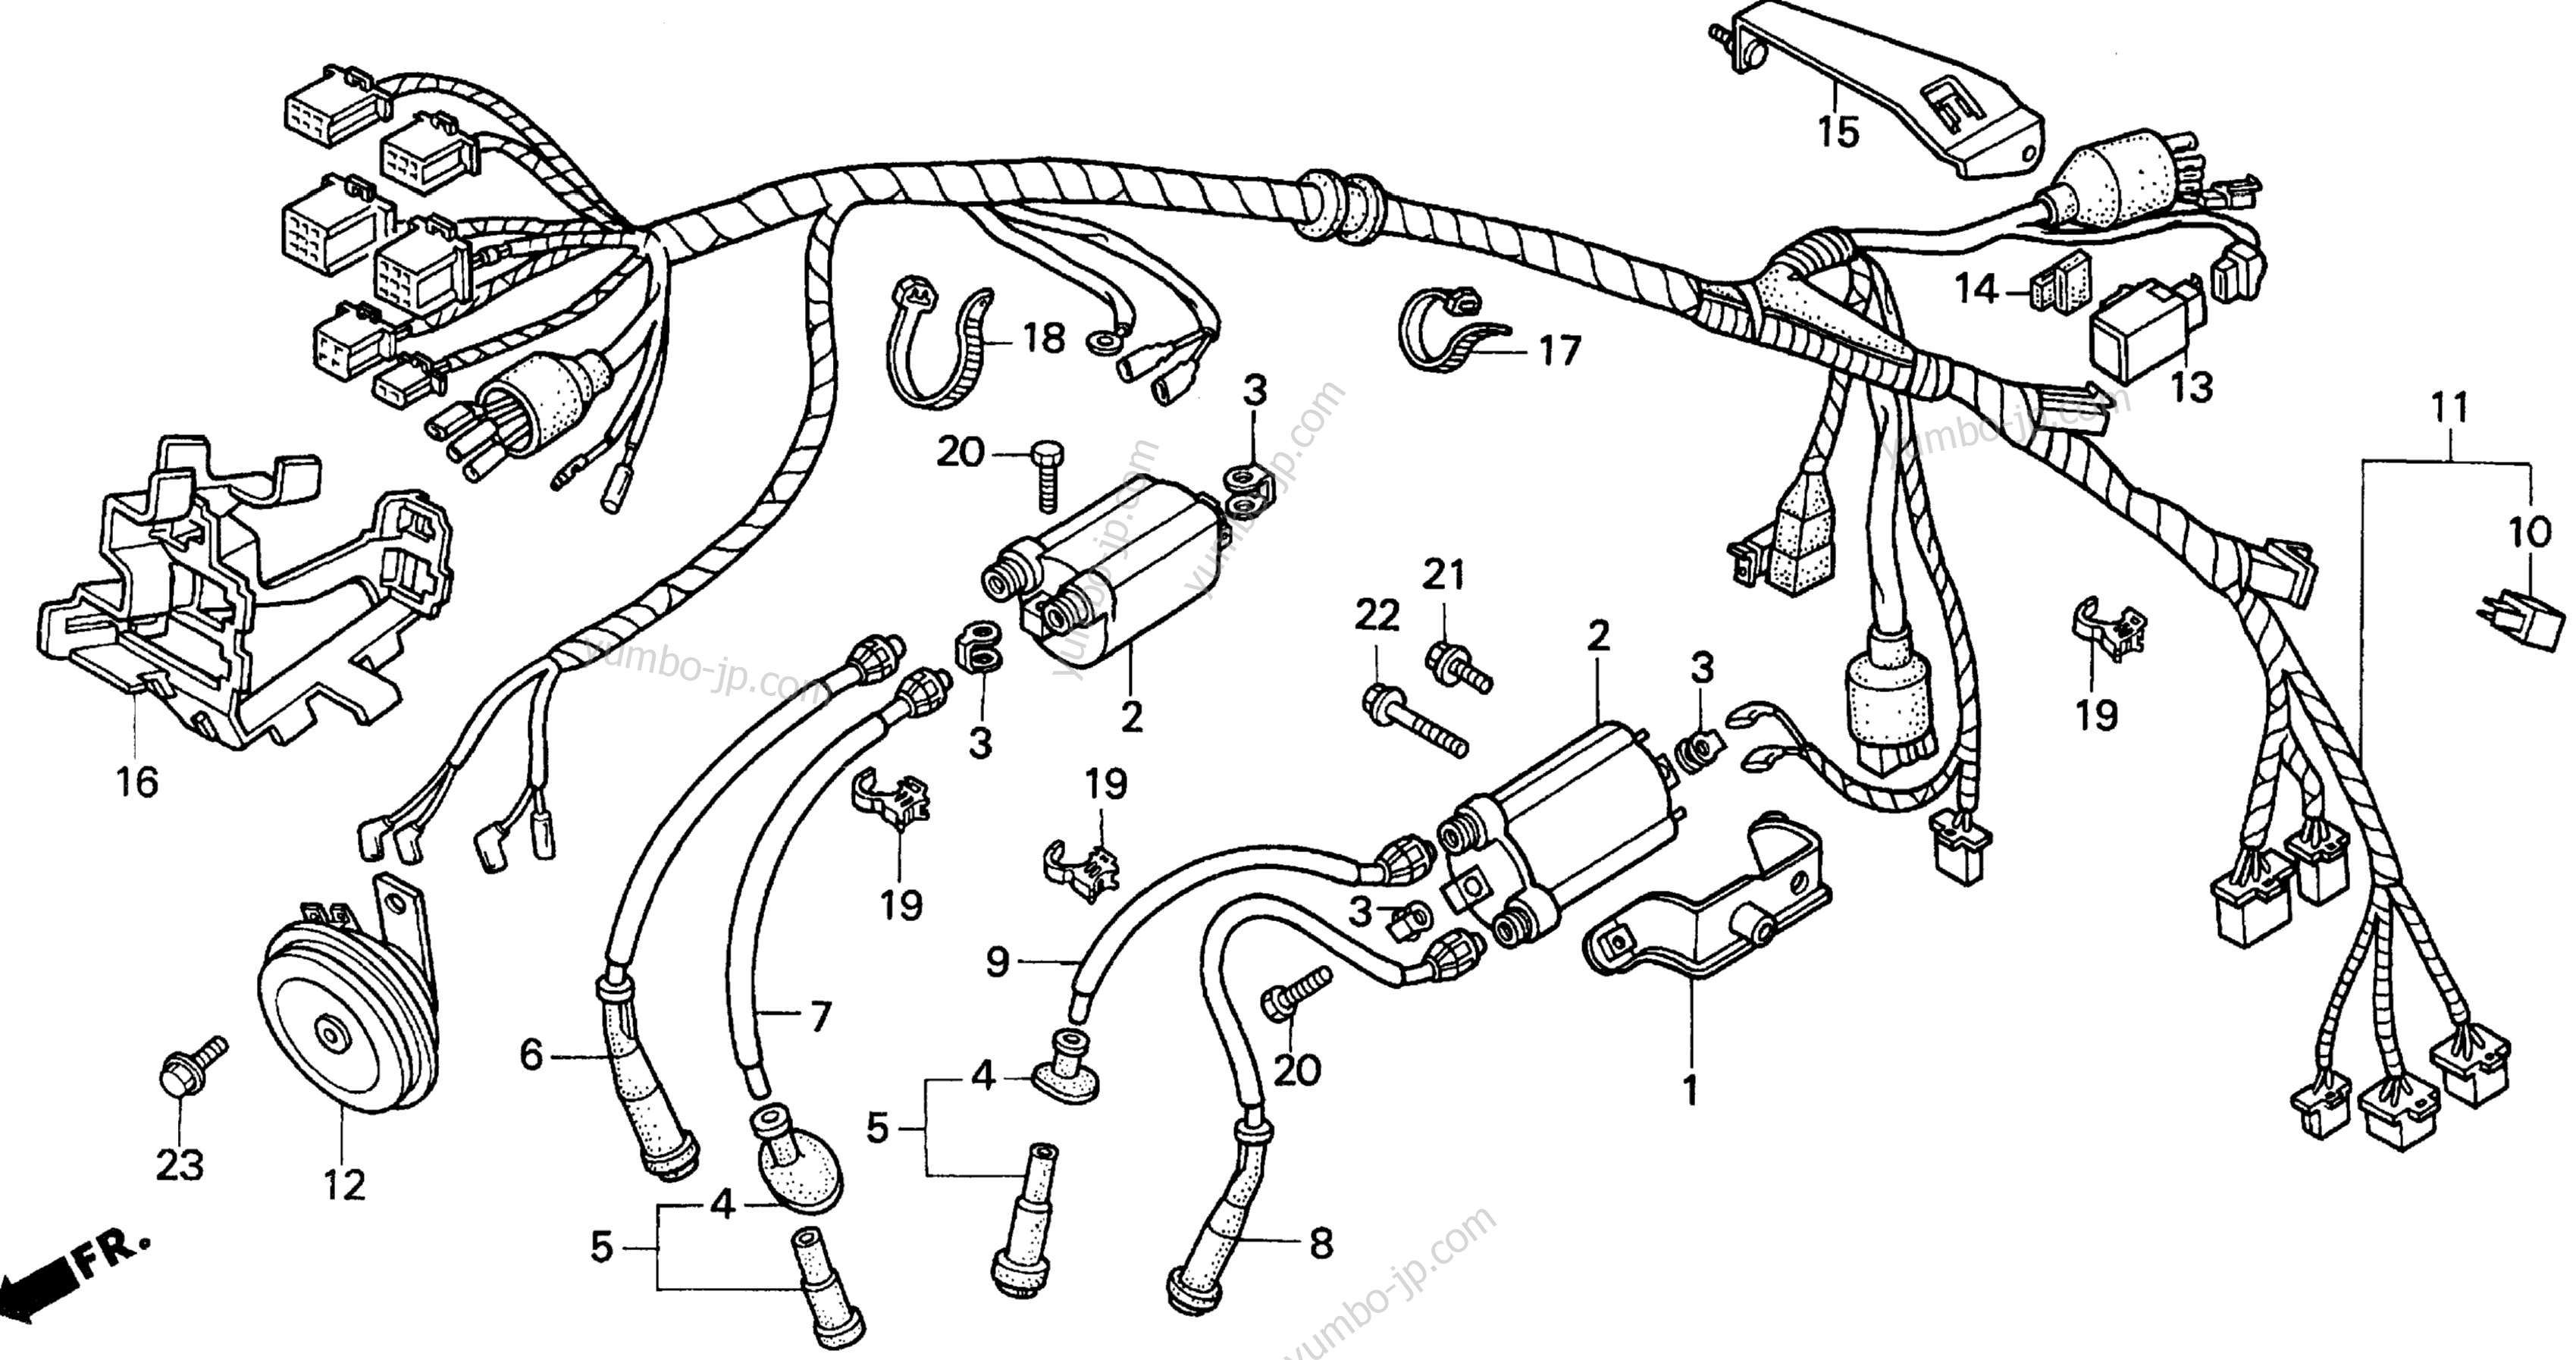 WIRE HARNESS for motorcycles HONDA VT600CD A 2001 year